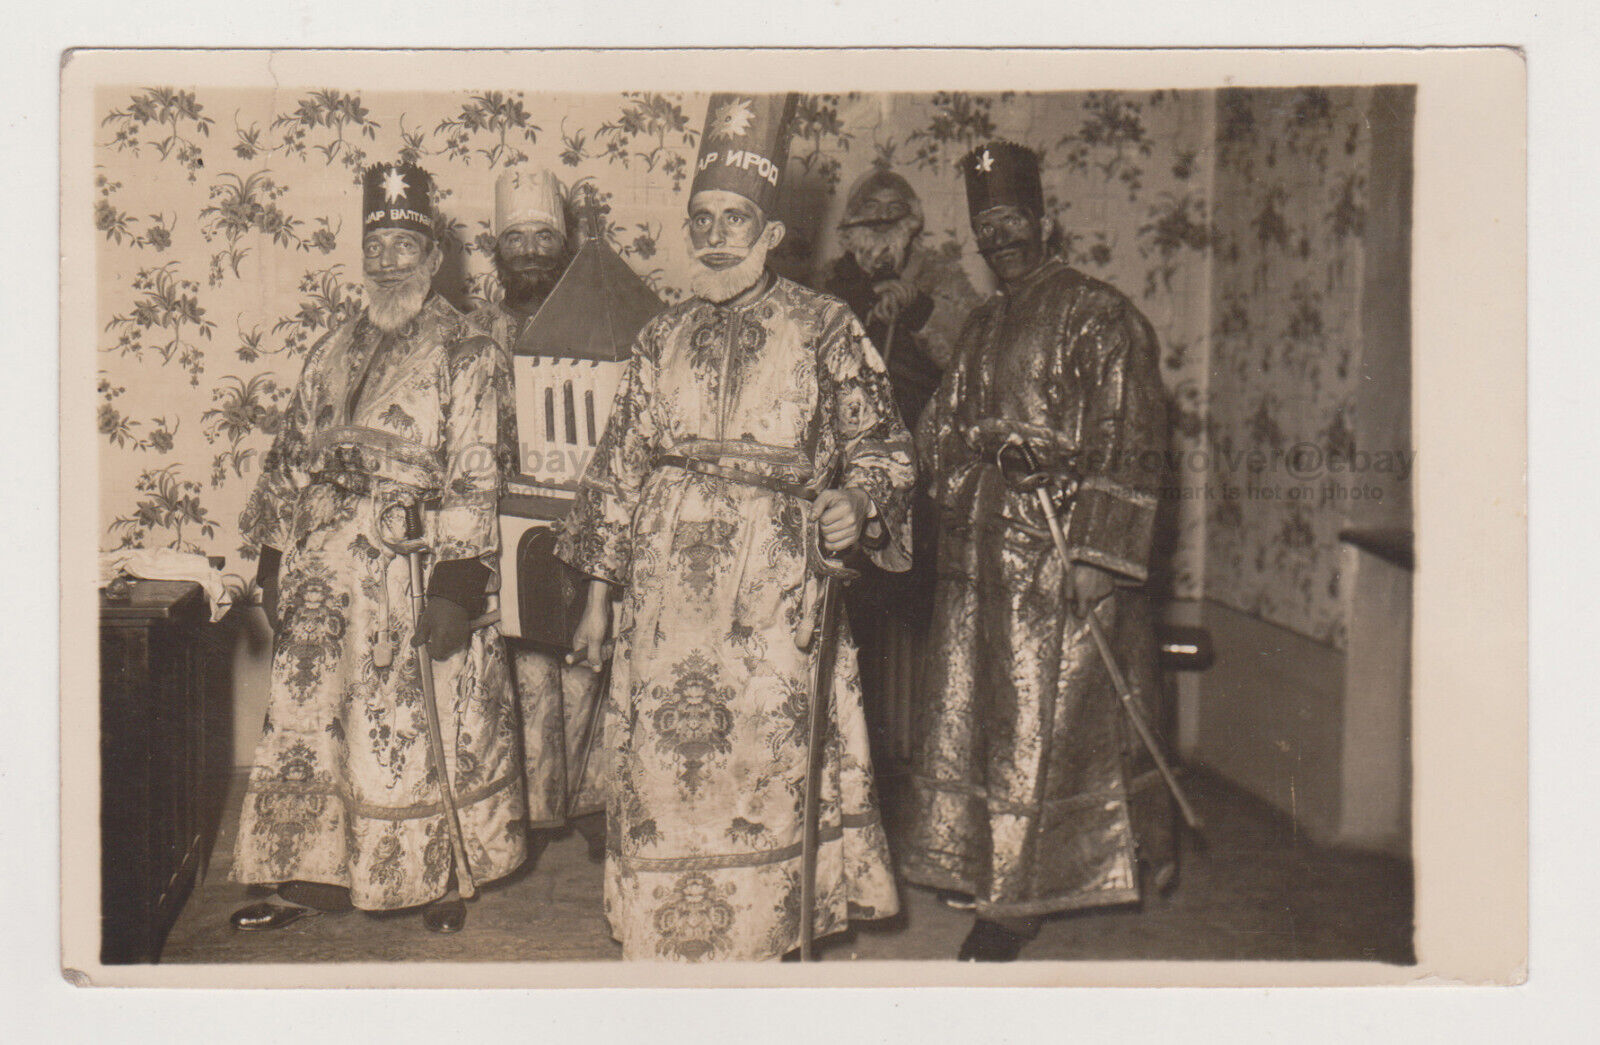 Quirky Group of Men Clad in Uniquely Twisted Costumes Unusual Abstract Antique